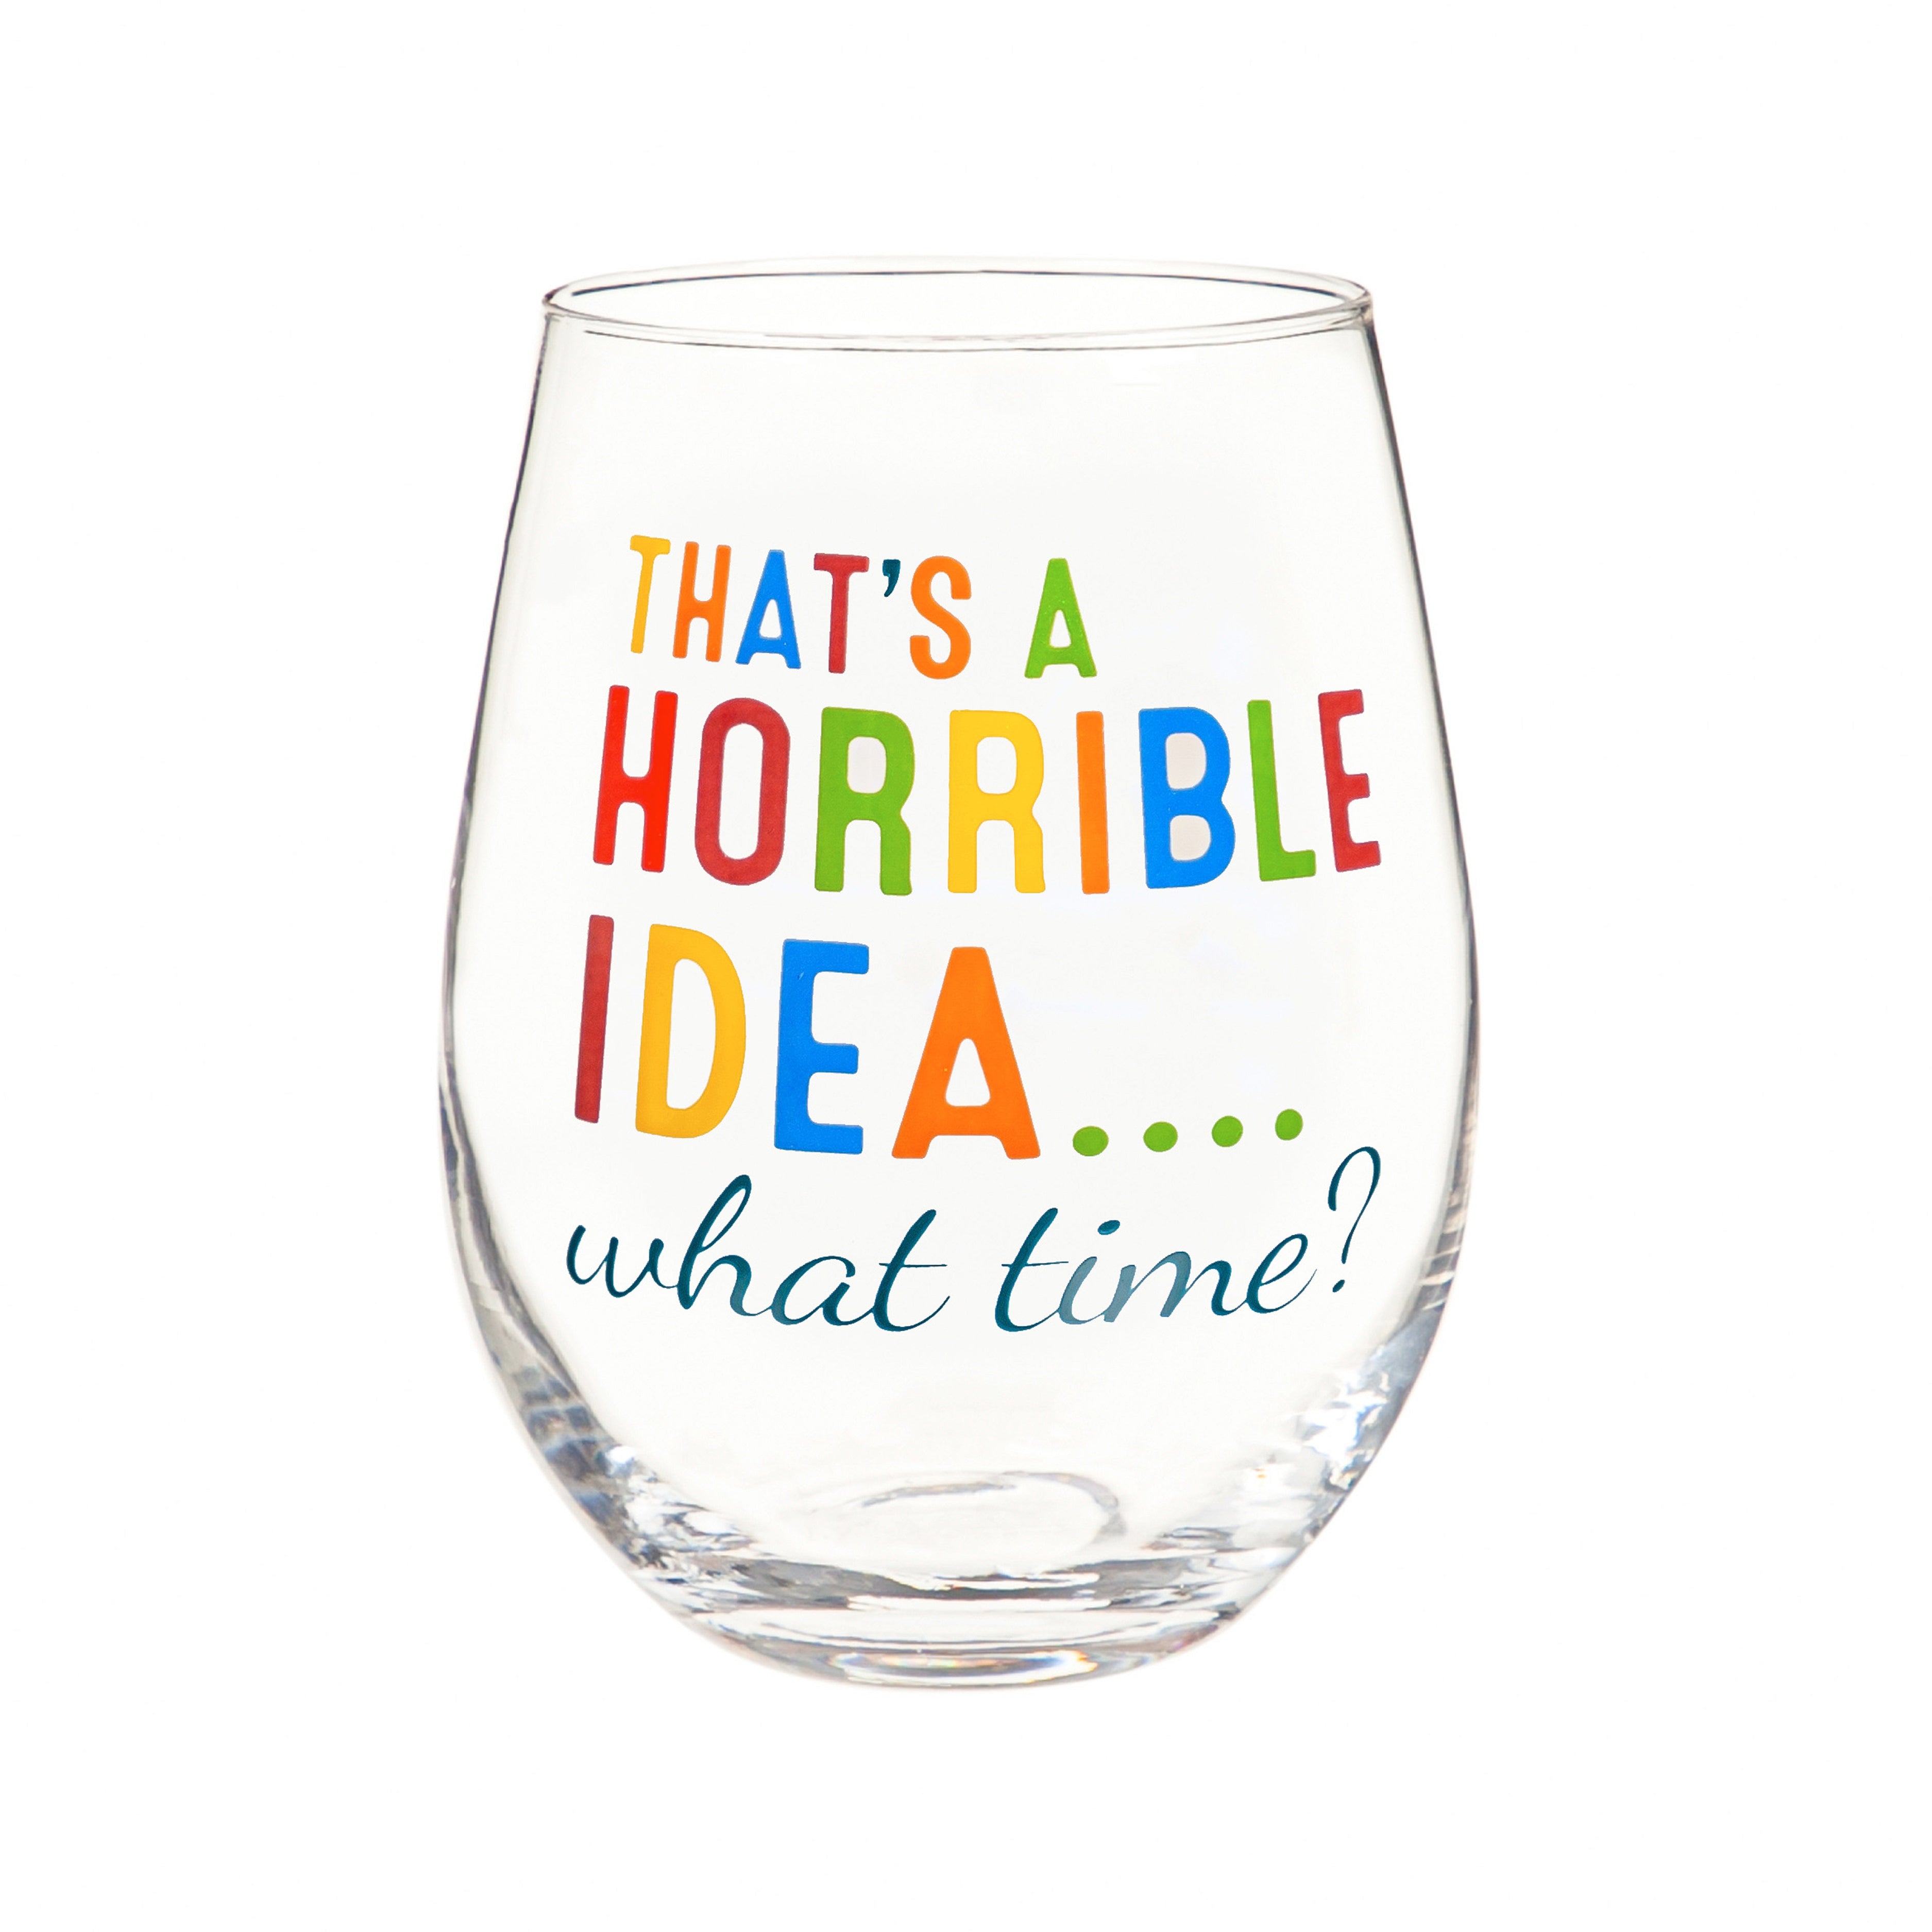 Stemless Wine Glass That's a Horrible Idea...what time?